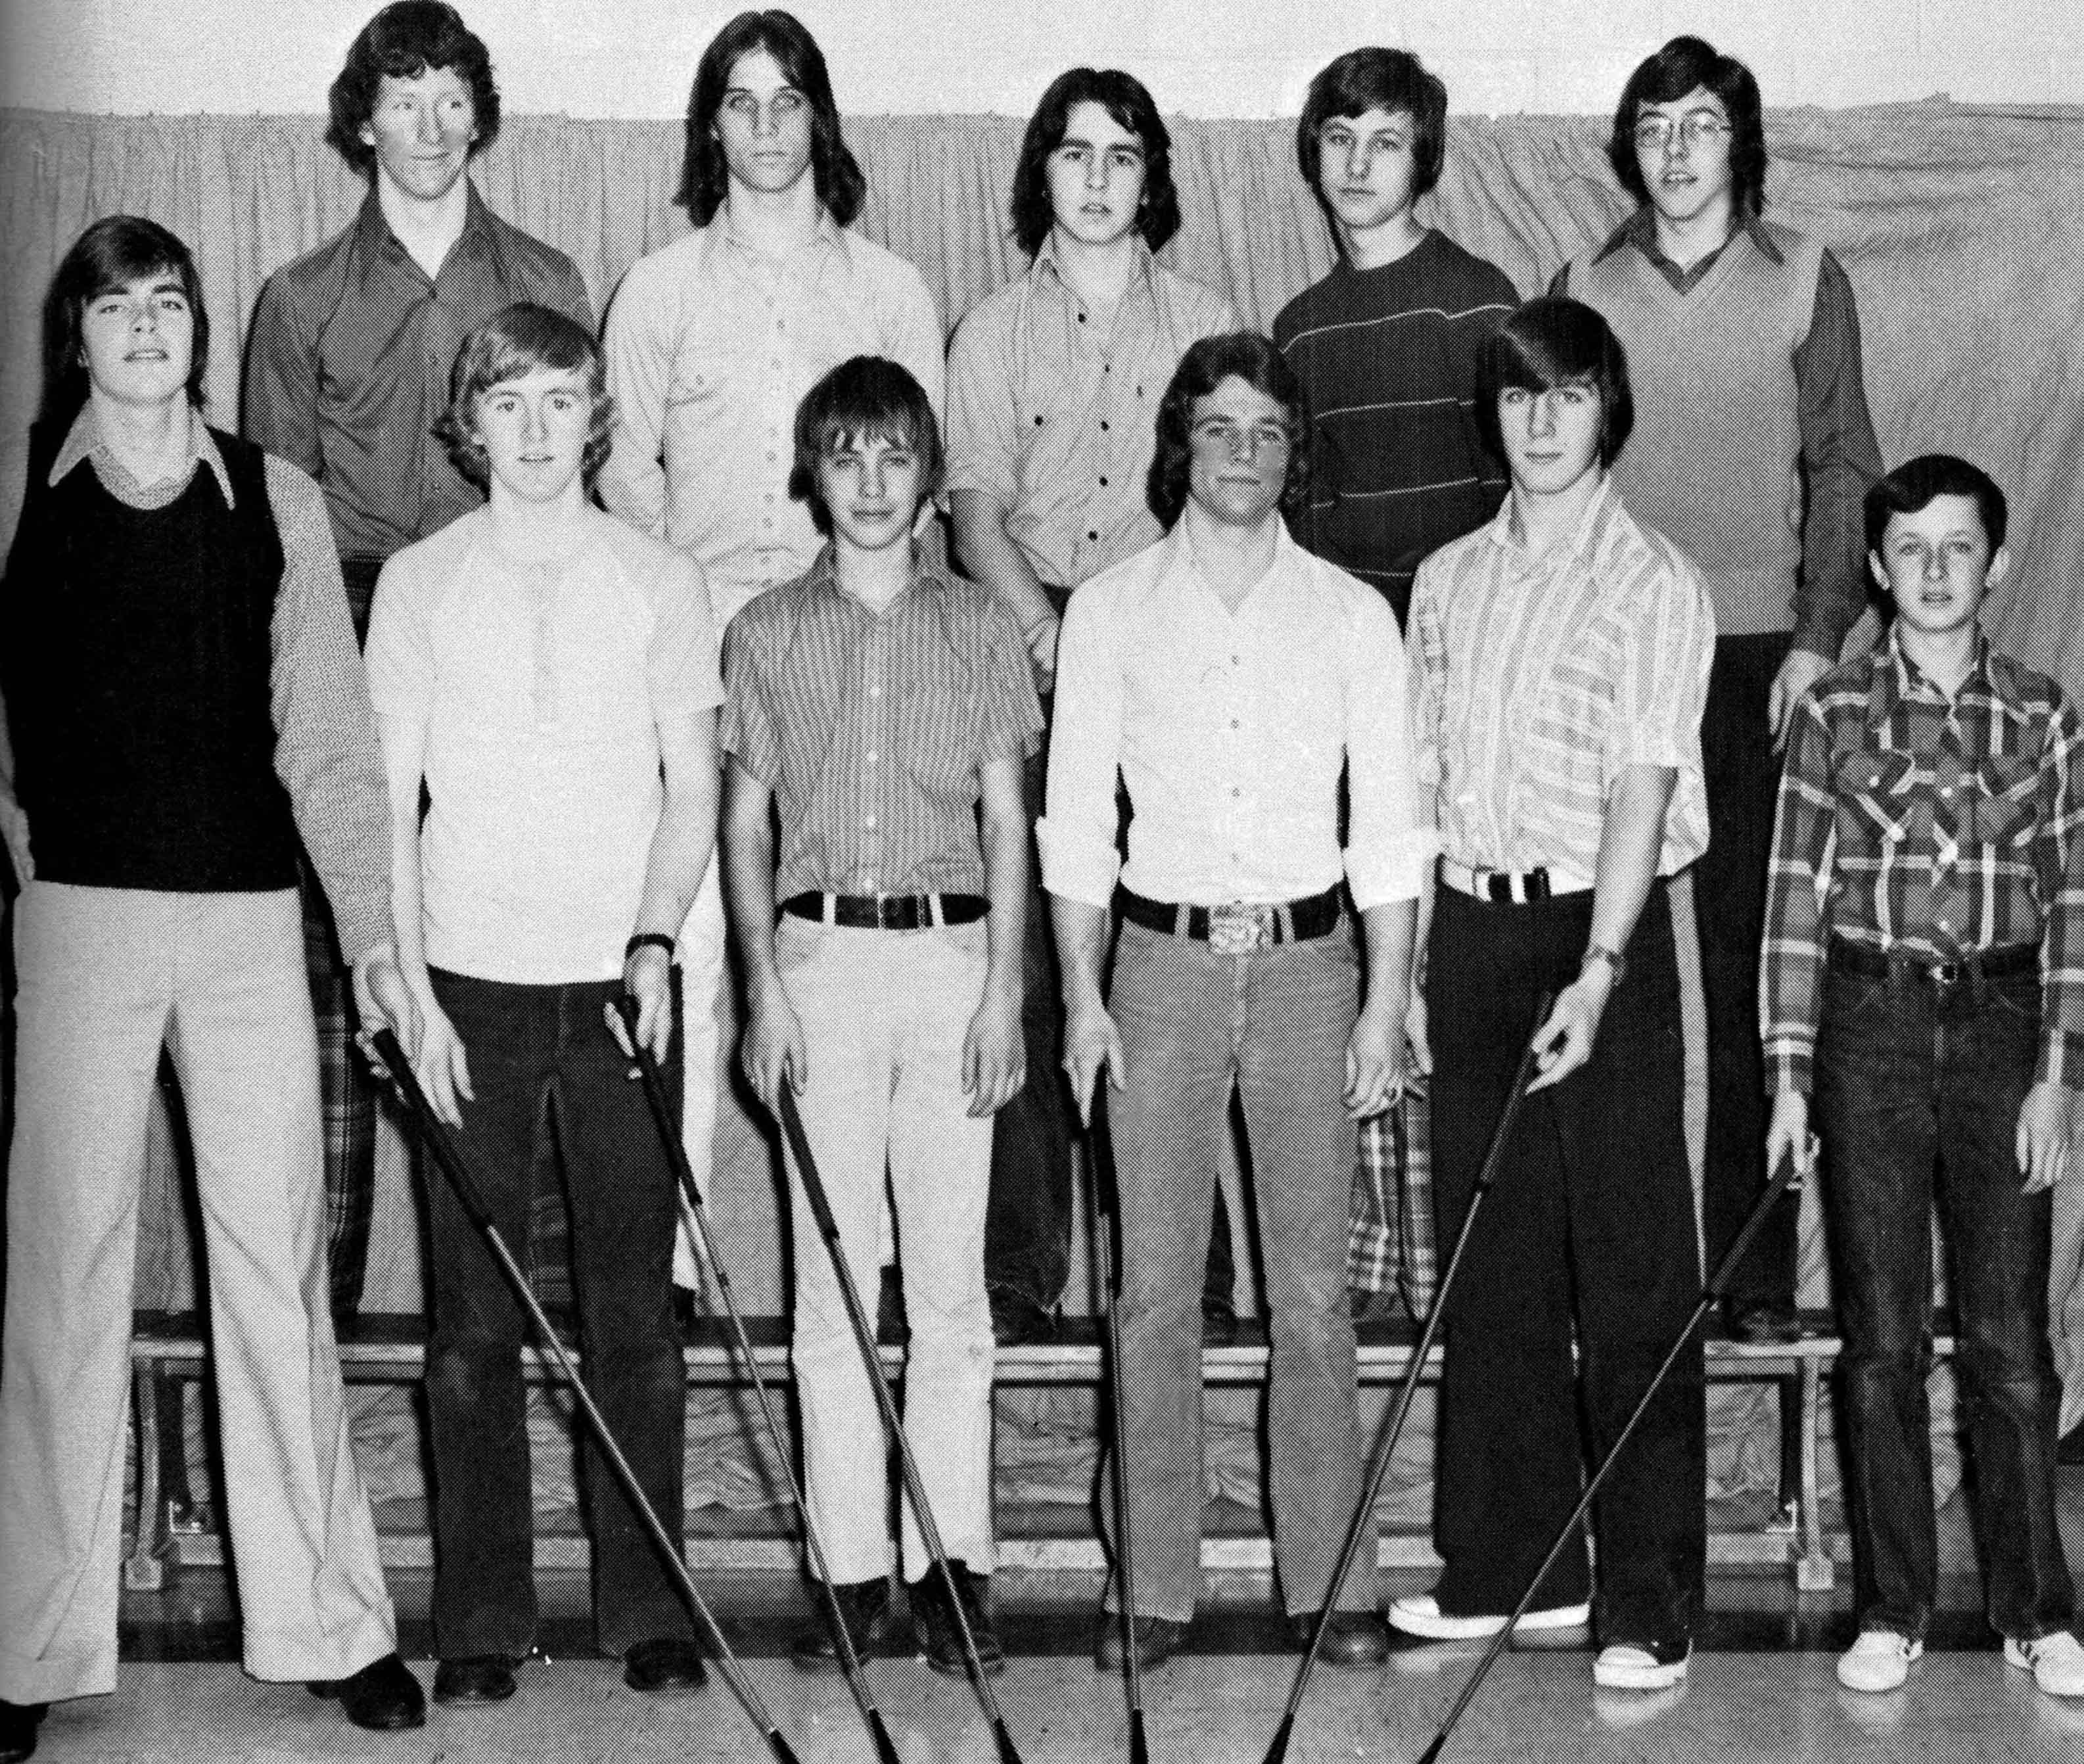 (Click to magnify - multiple levels of magnification) NO CAPTIONS - (with reference to the Golf Team) Ian Morrison, front left, then Dale Gibbons; Bill Scott, back right, Greg Gates, middle back; others unknown.